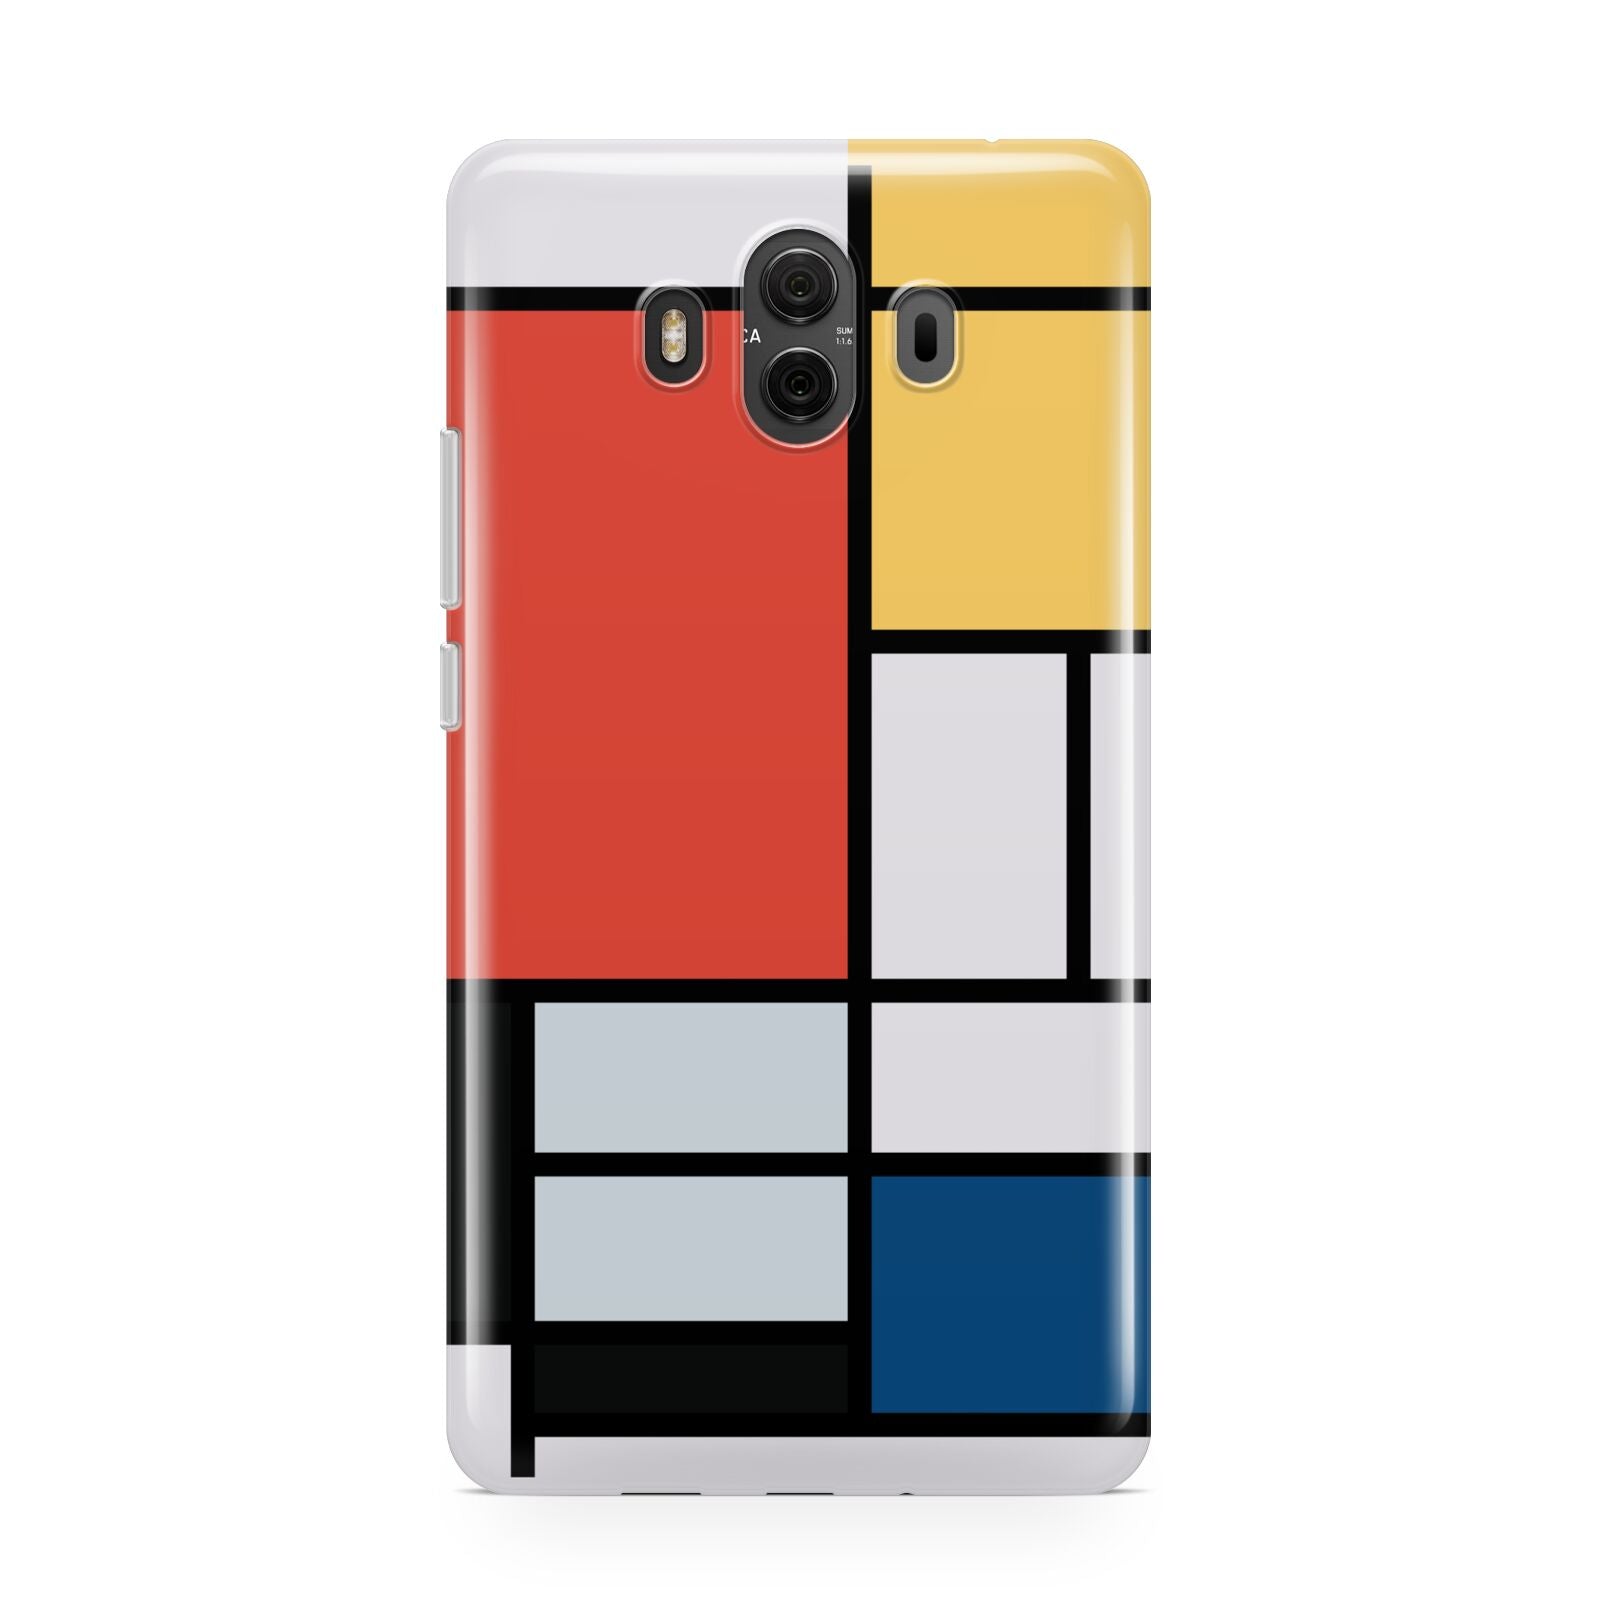 Piet Mondrian Composition Huawei Mate 10 Protective Phone Case